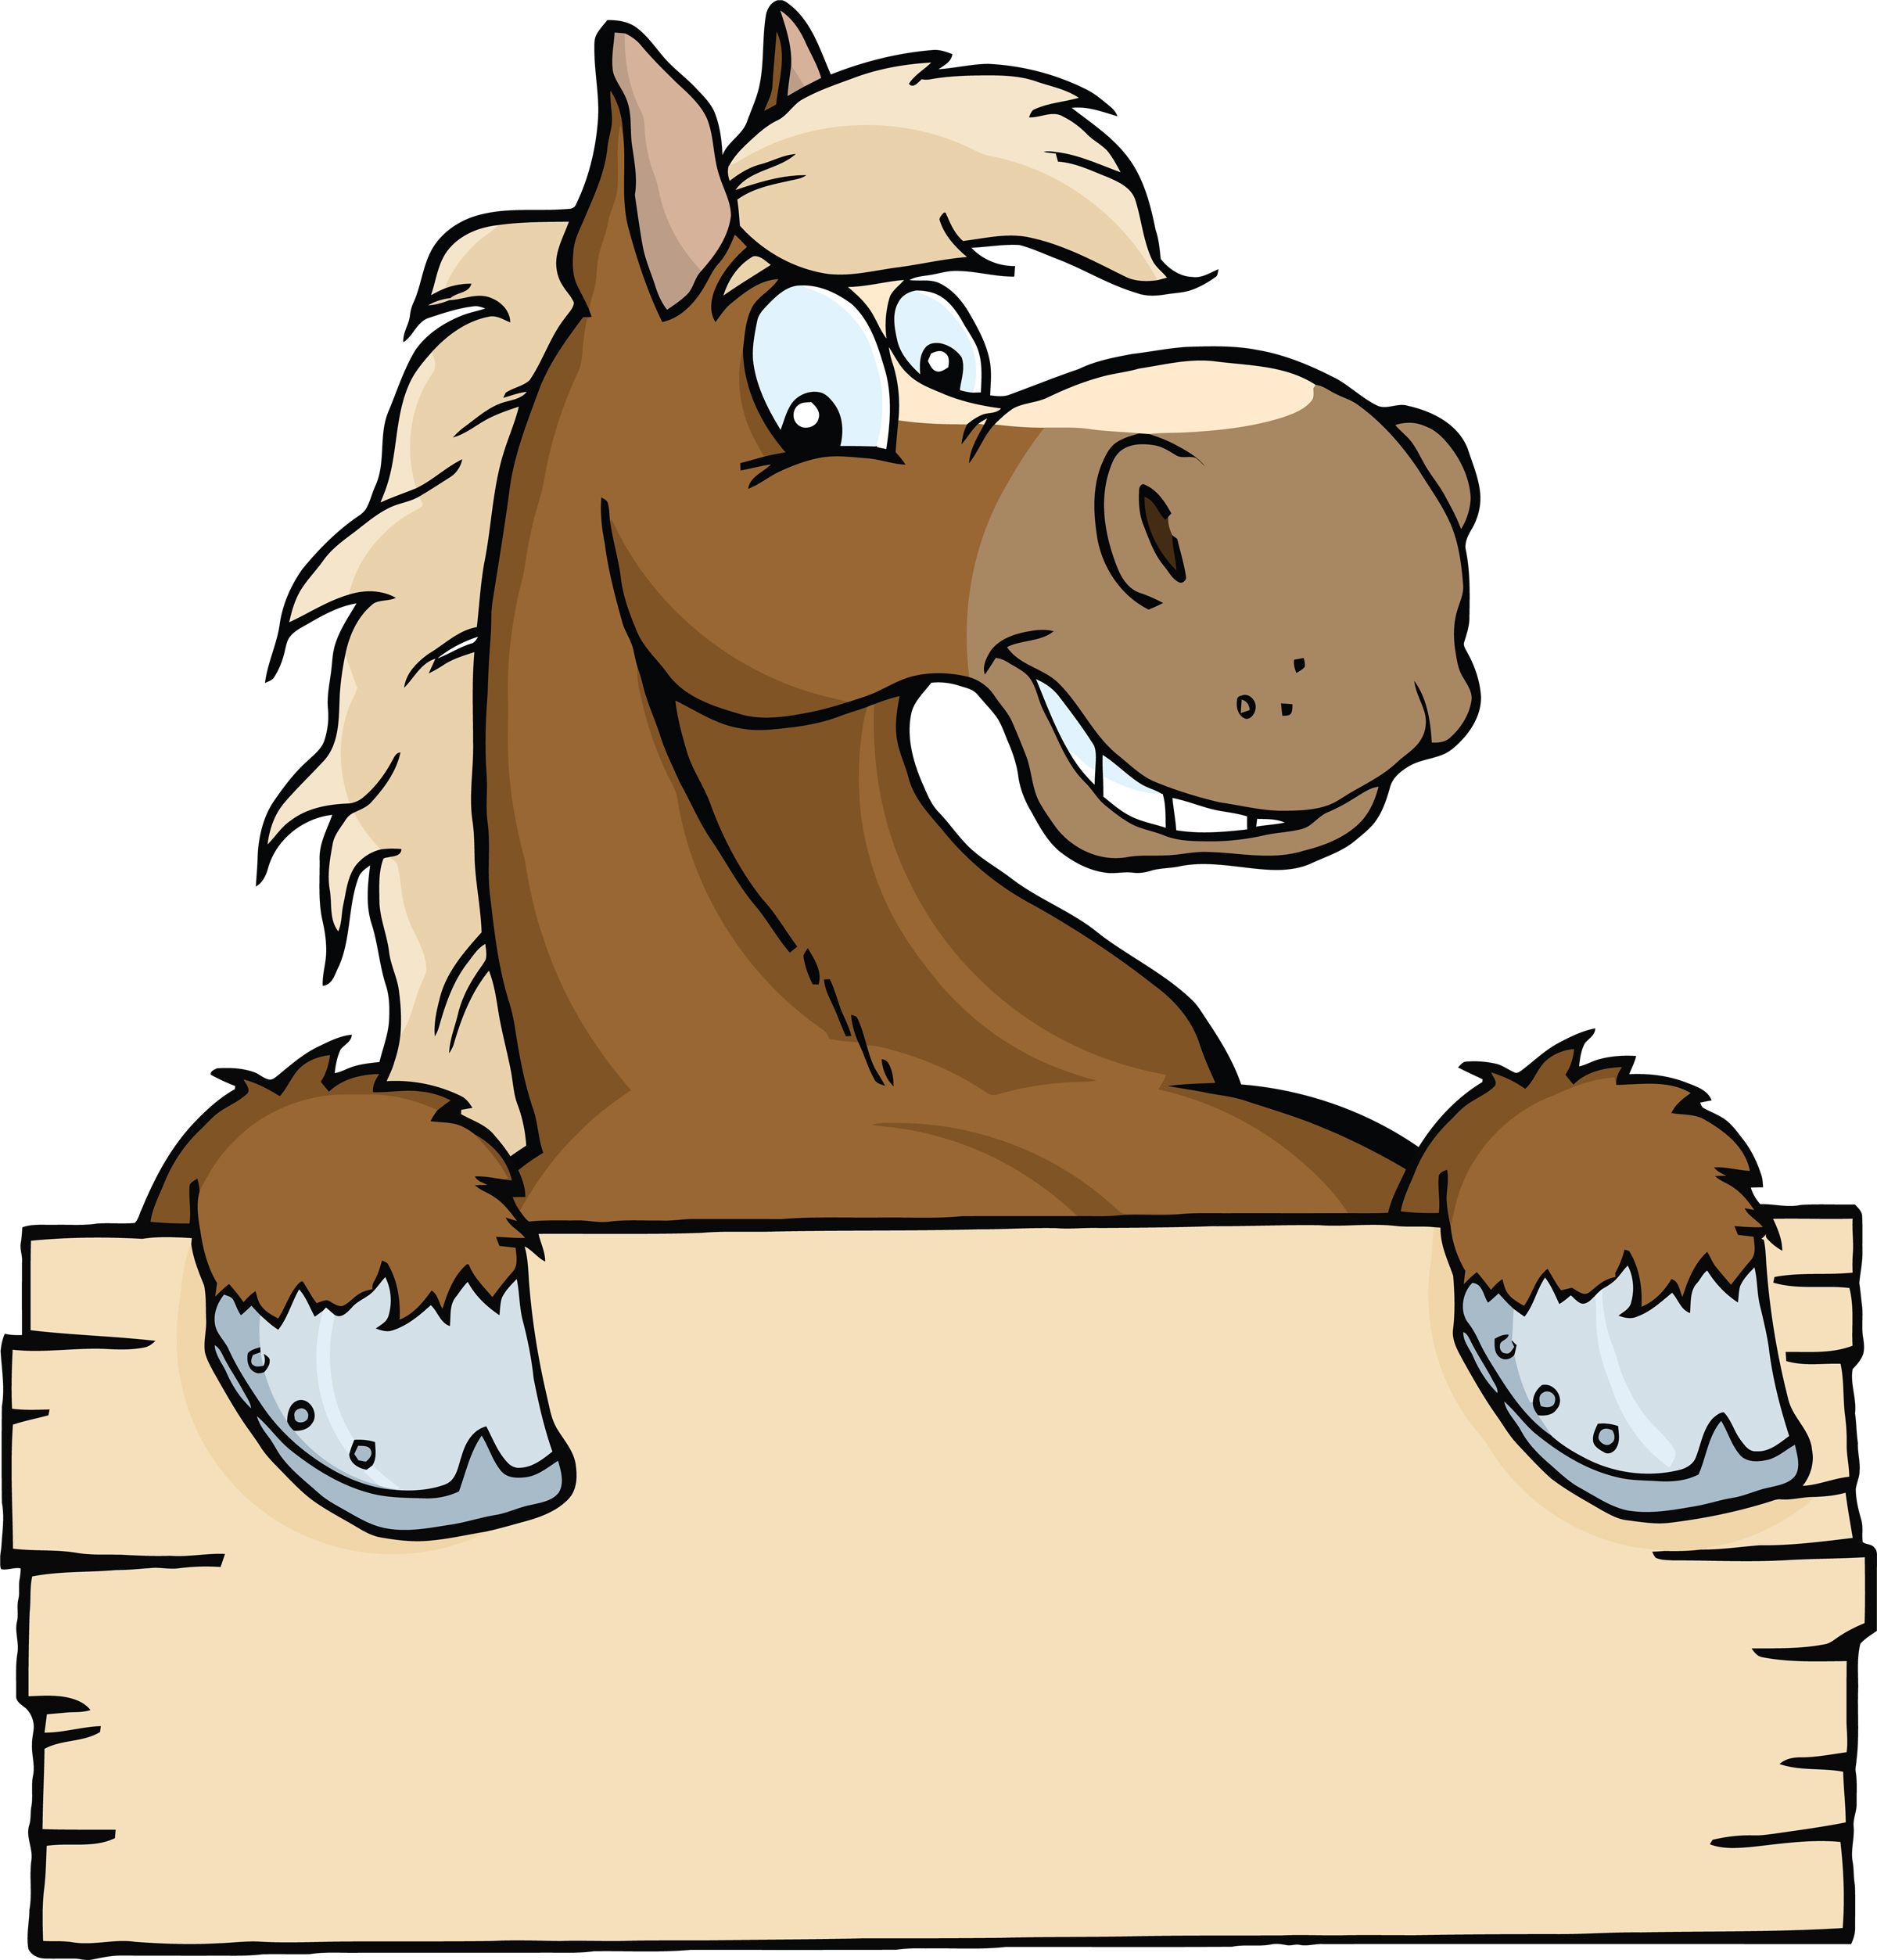 Free Funny Horse Picture Cartoon, Download Free Clip Art, Free Clip Art on Clipart Library